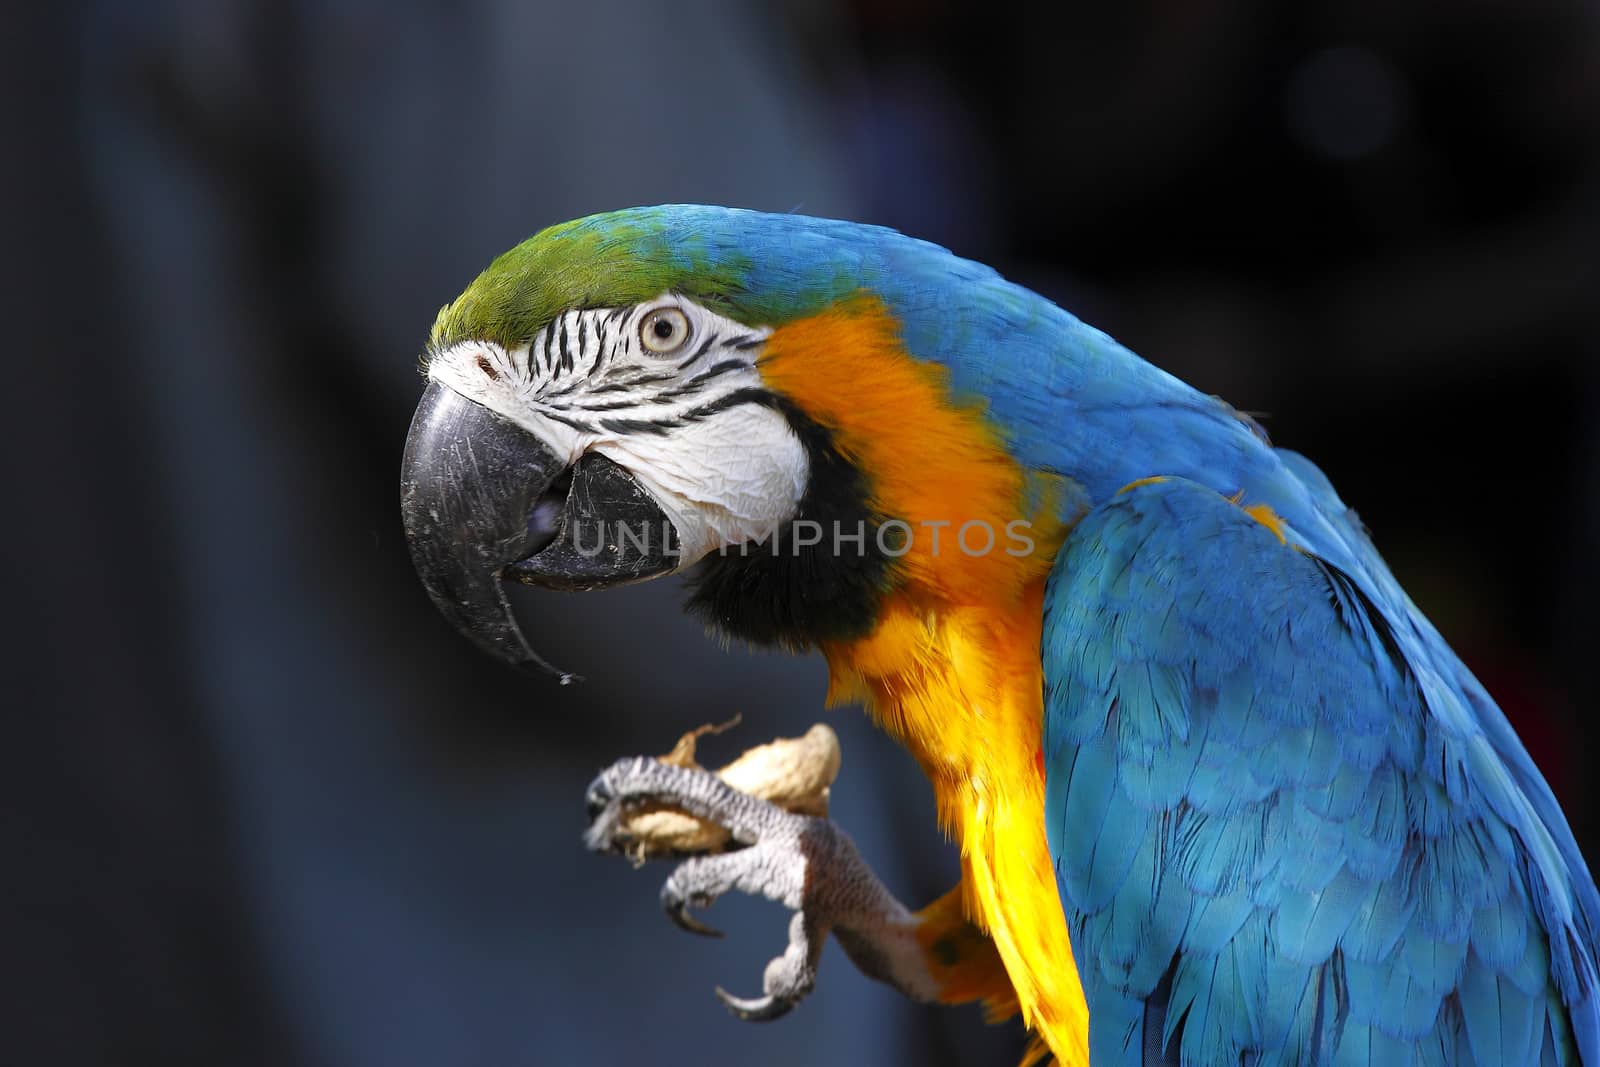 A portrait of a beautiful parrot by DigiArtFoto